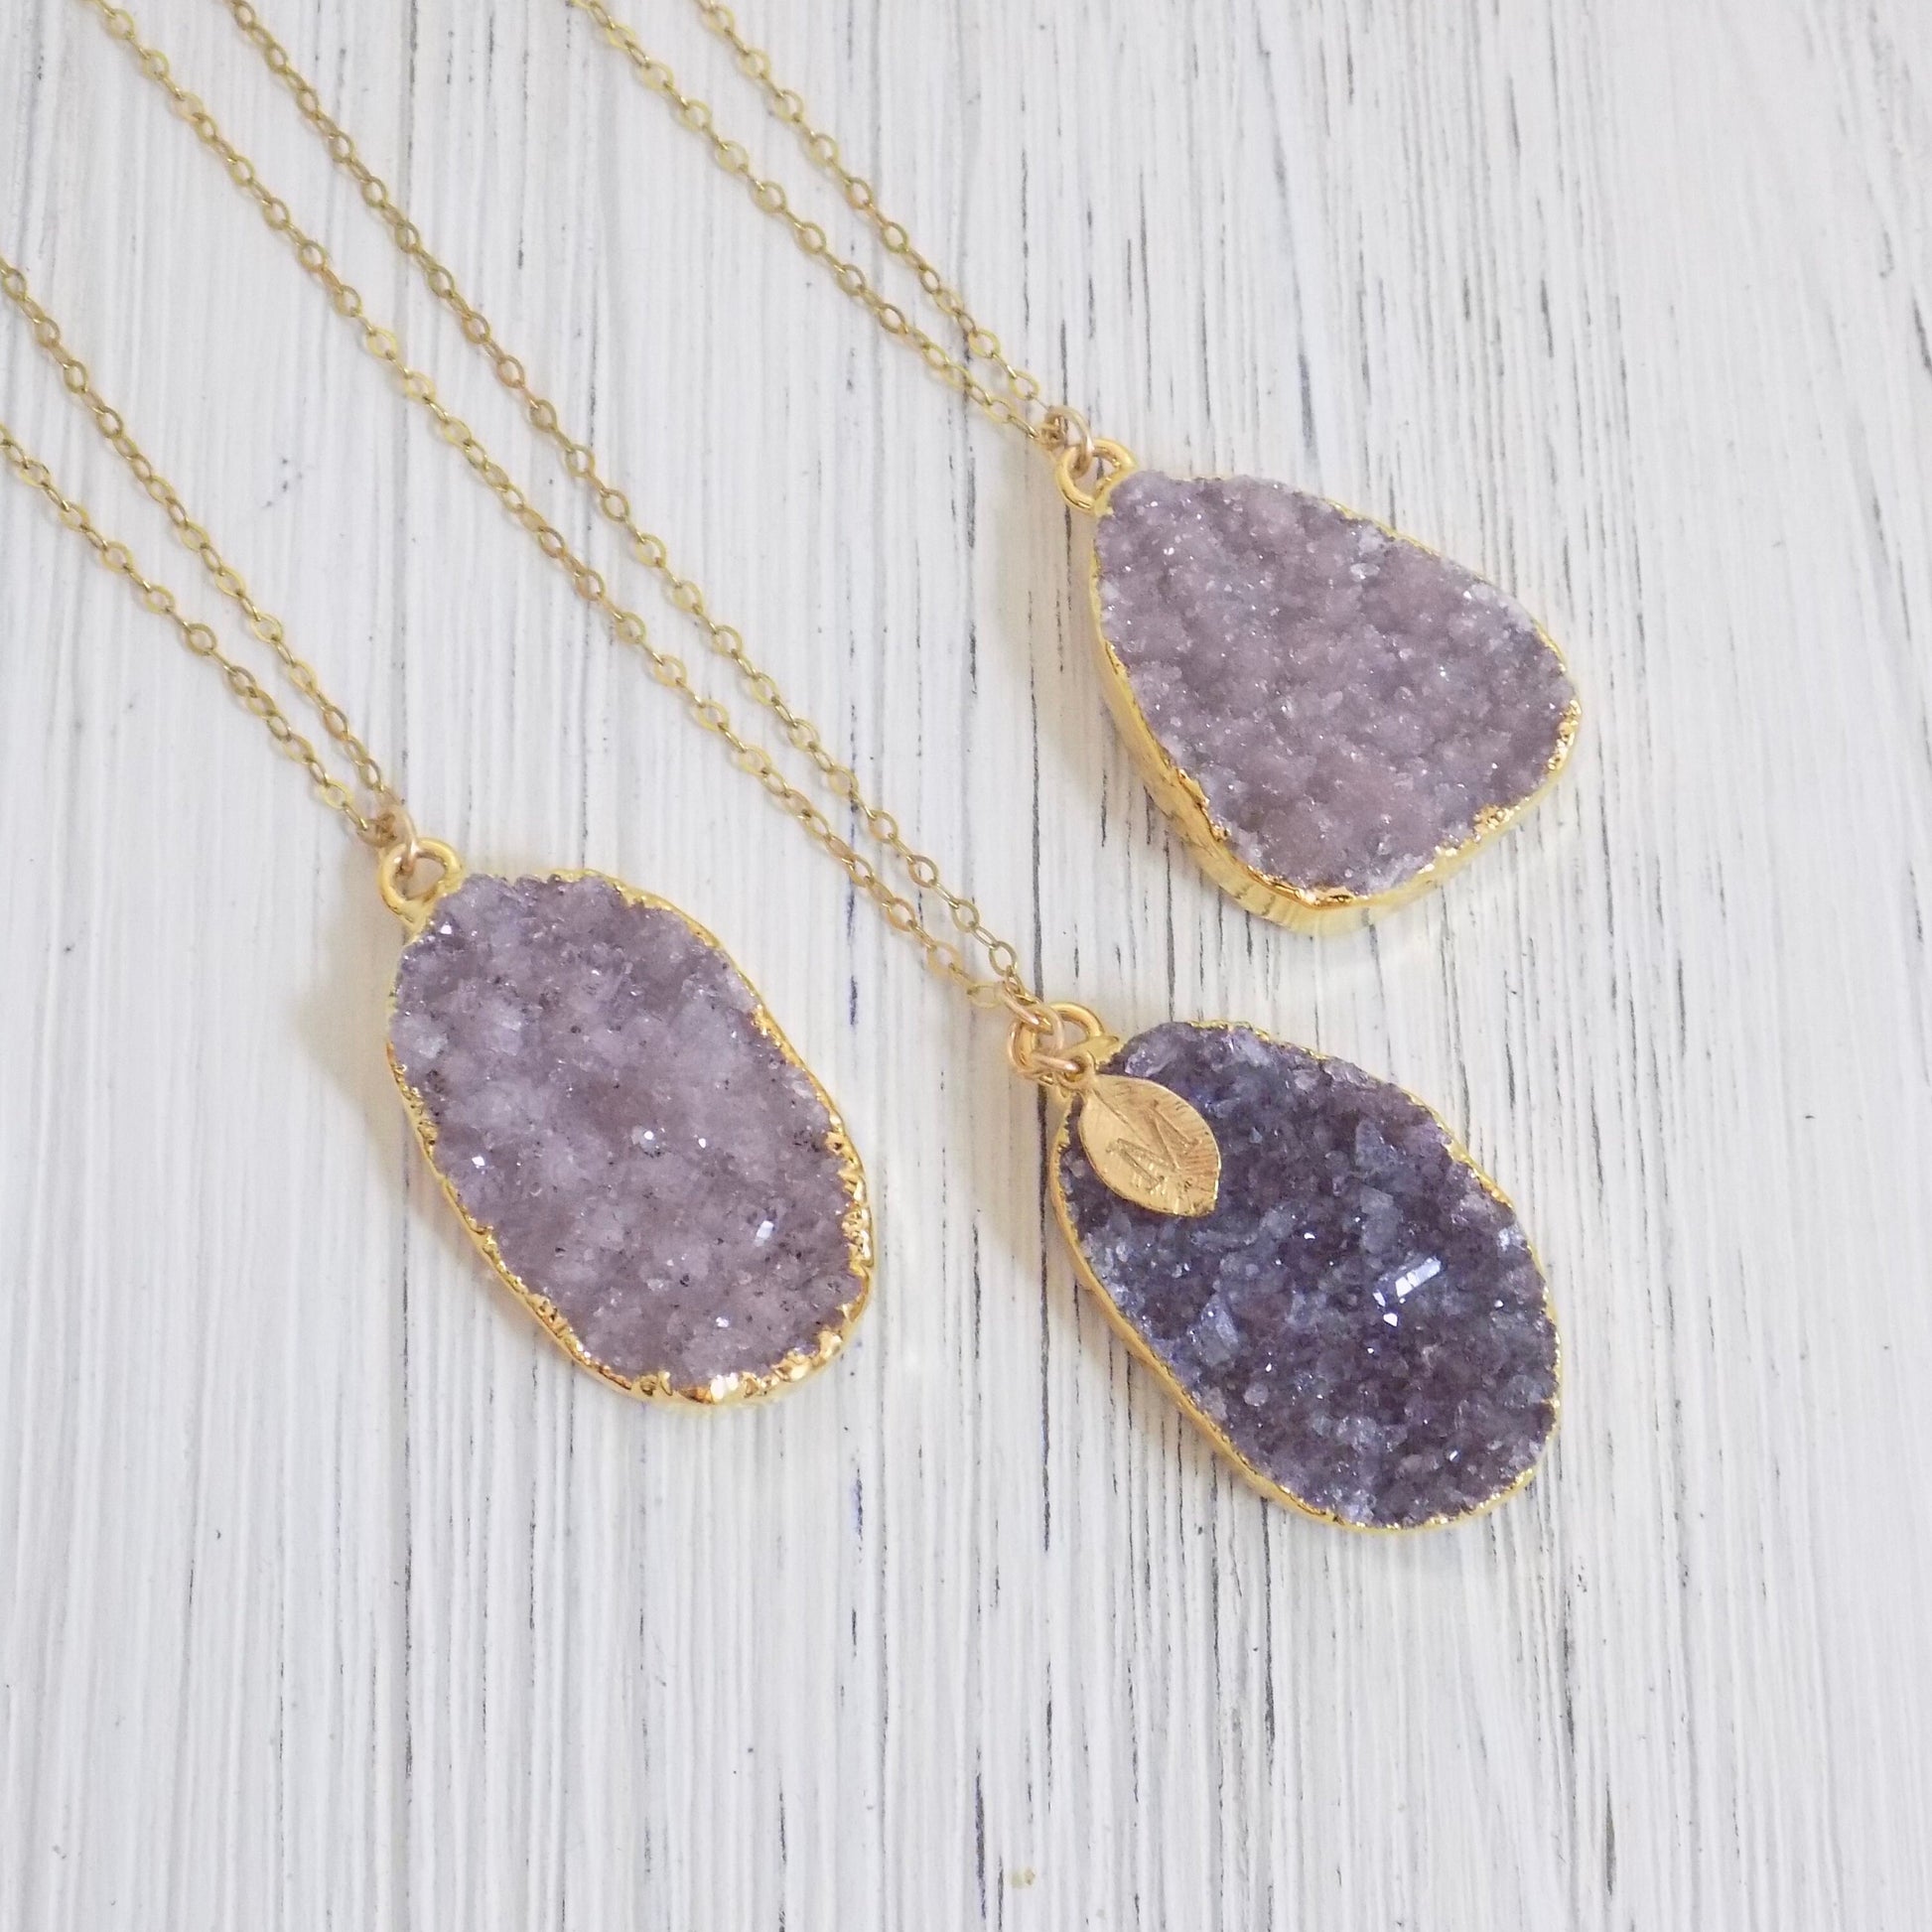 Personalized Raw Amethyst Necklace - Druzy Pendant Necklace